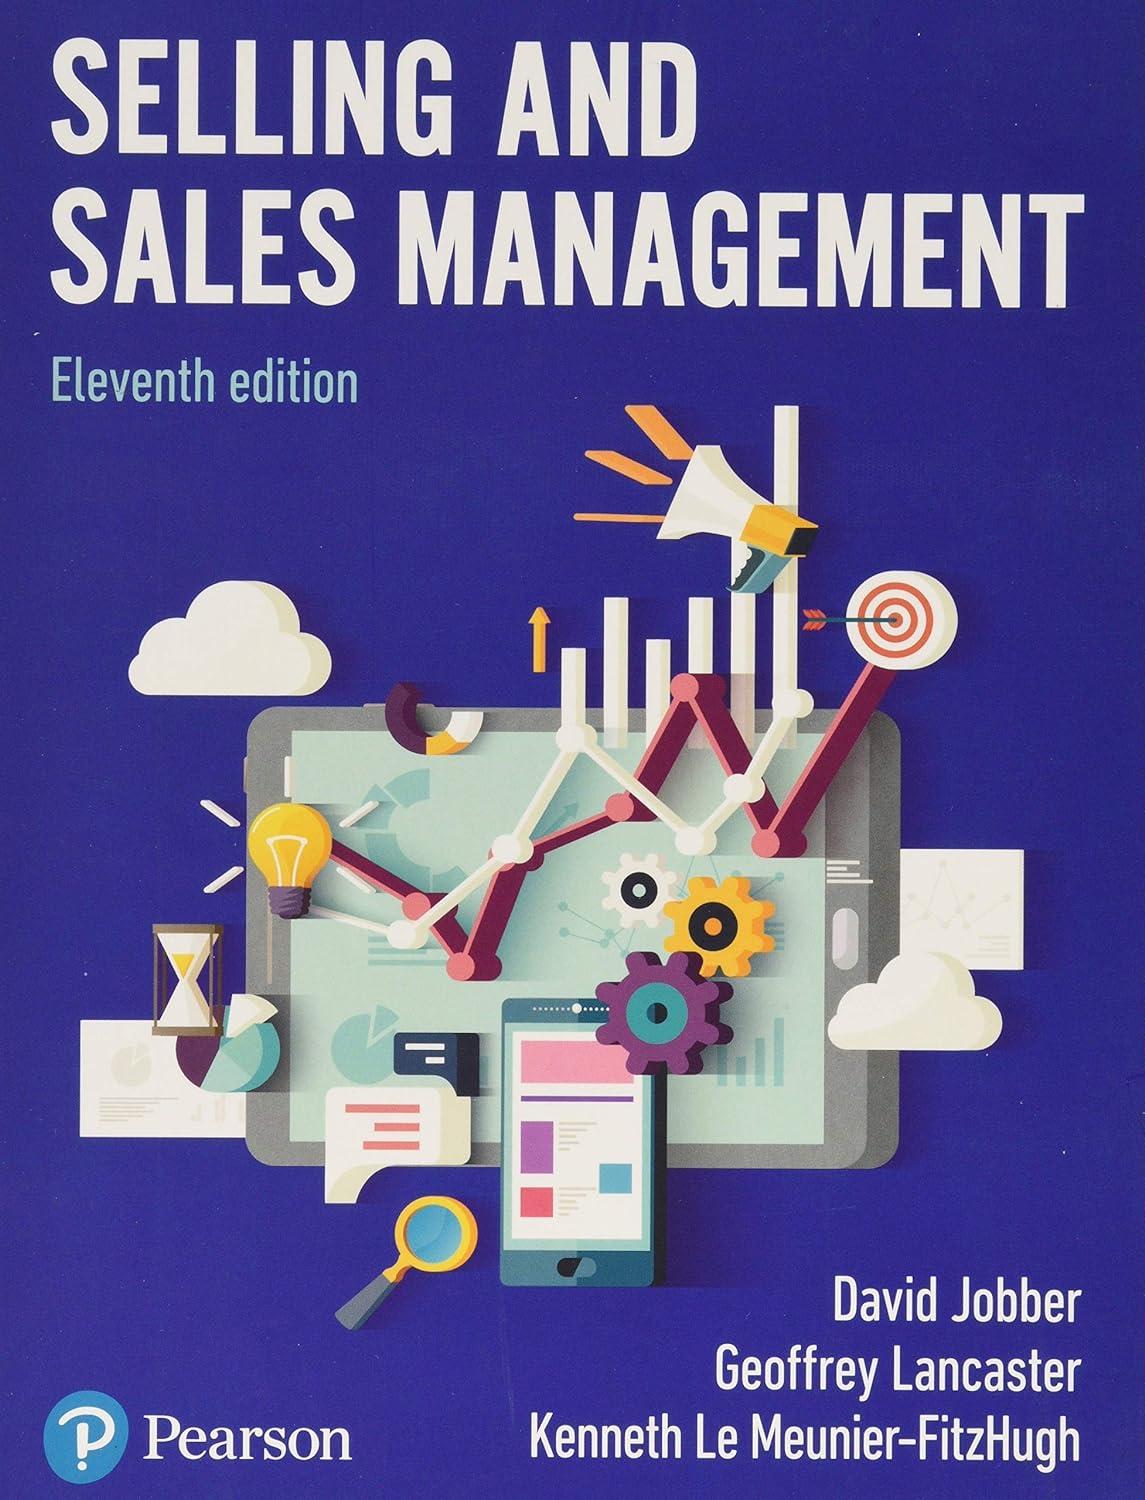 selling and sales management 11th edition kenneth le meunier-fitzhugh 1292205024, 978-1292205021